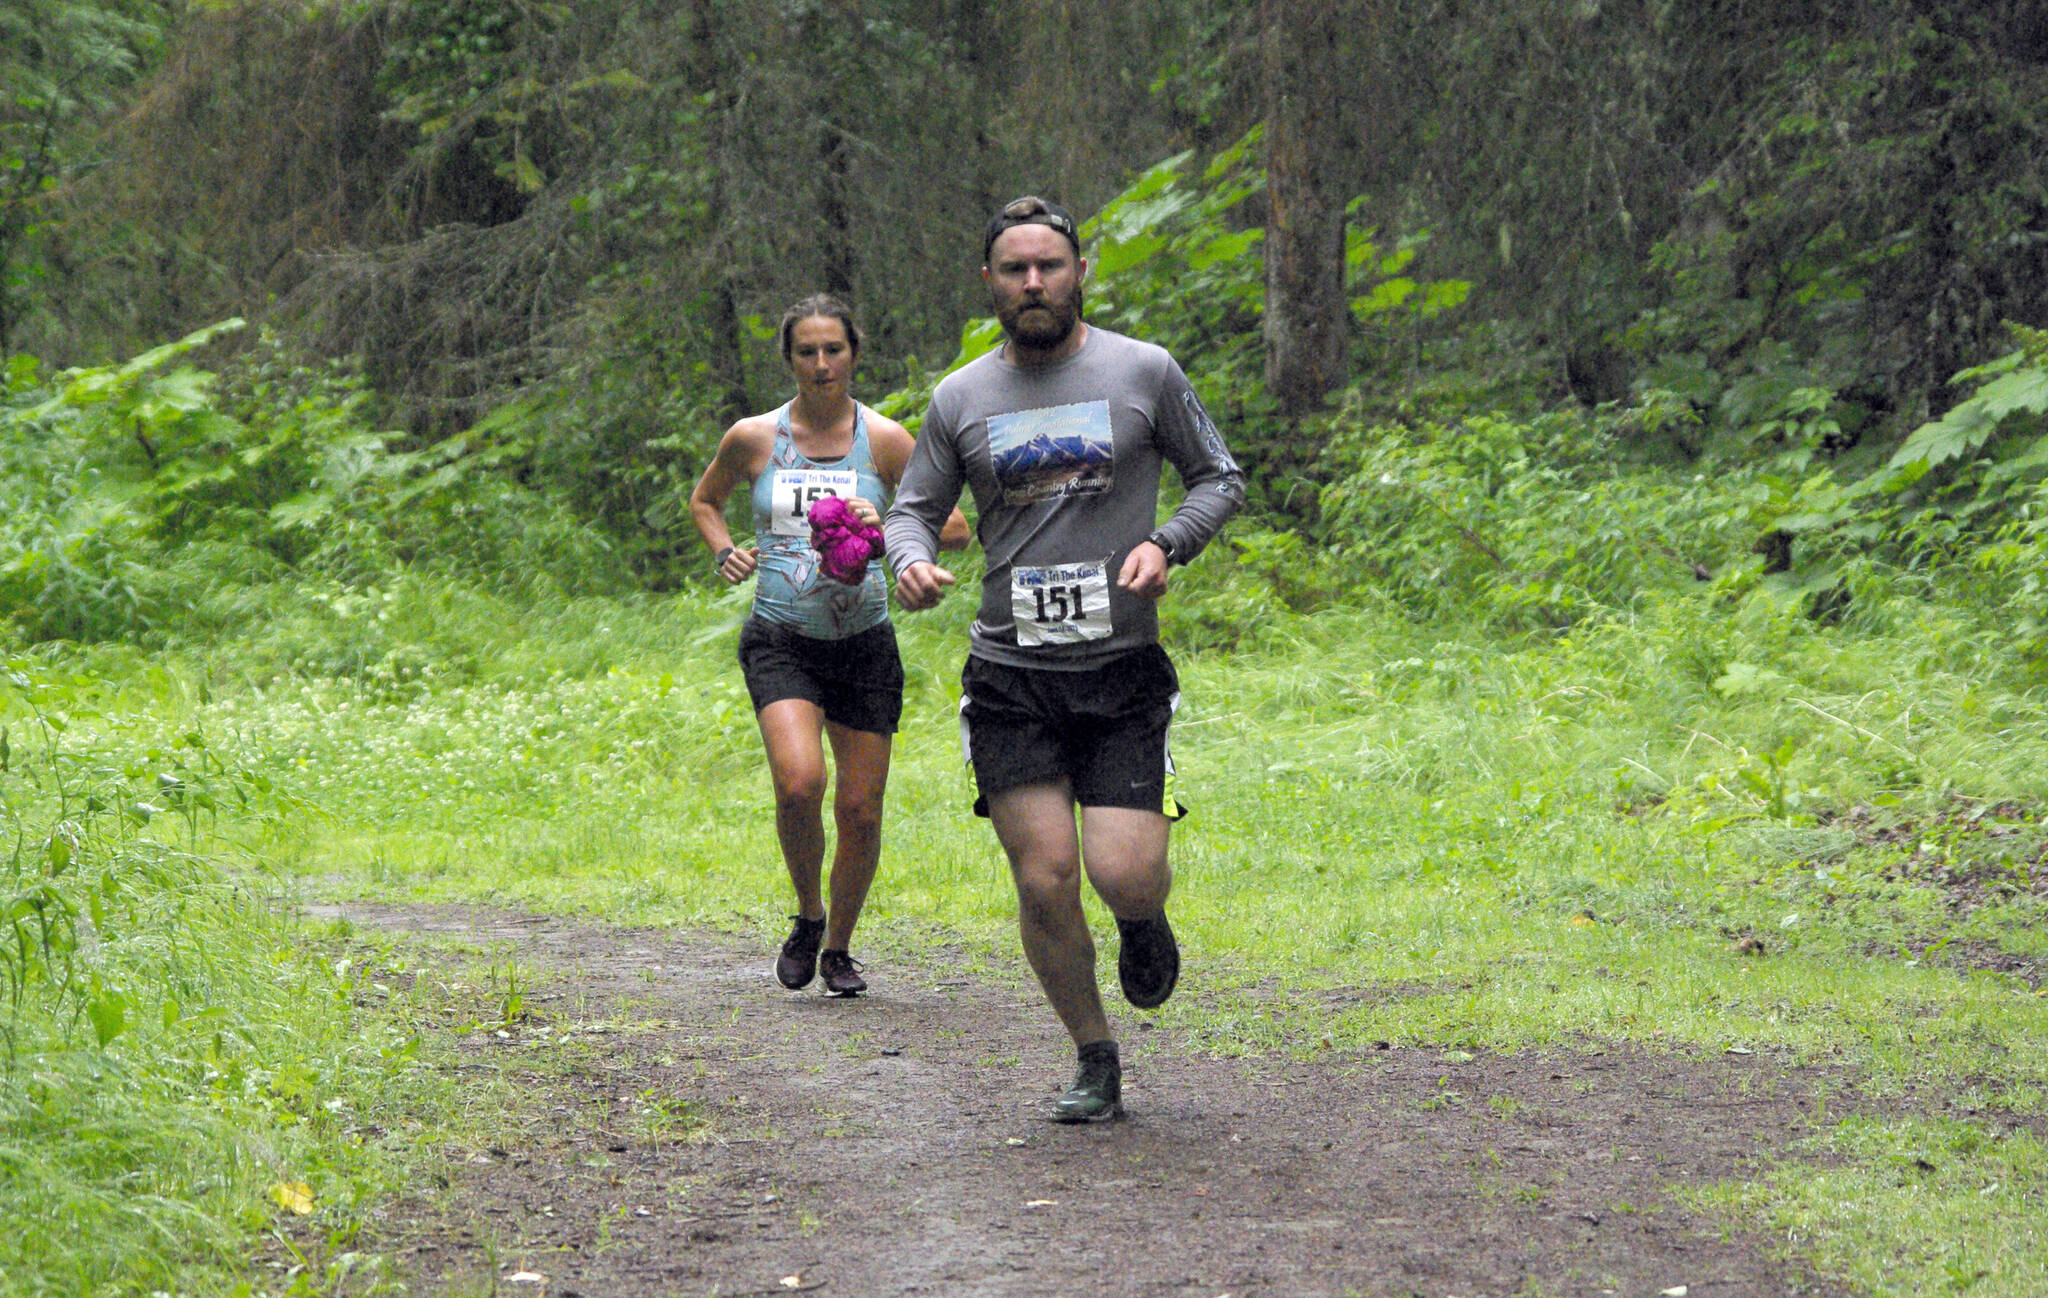 James Butler leads Madison Labosky at the Unity Run on Saturday, July 16, 2022, at Tsalteshi Trails just outside of Soldotna, Alaska. Butler won the men’s 10-kilometer race, while Labosky won the women’s 5-kilometer race. (Photo by Jeff Helminiak/Peninsula Clarion)